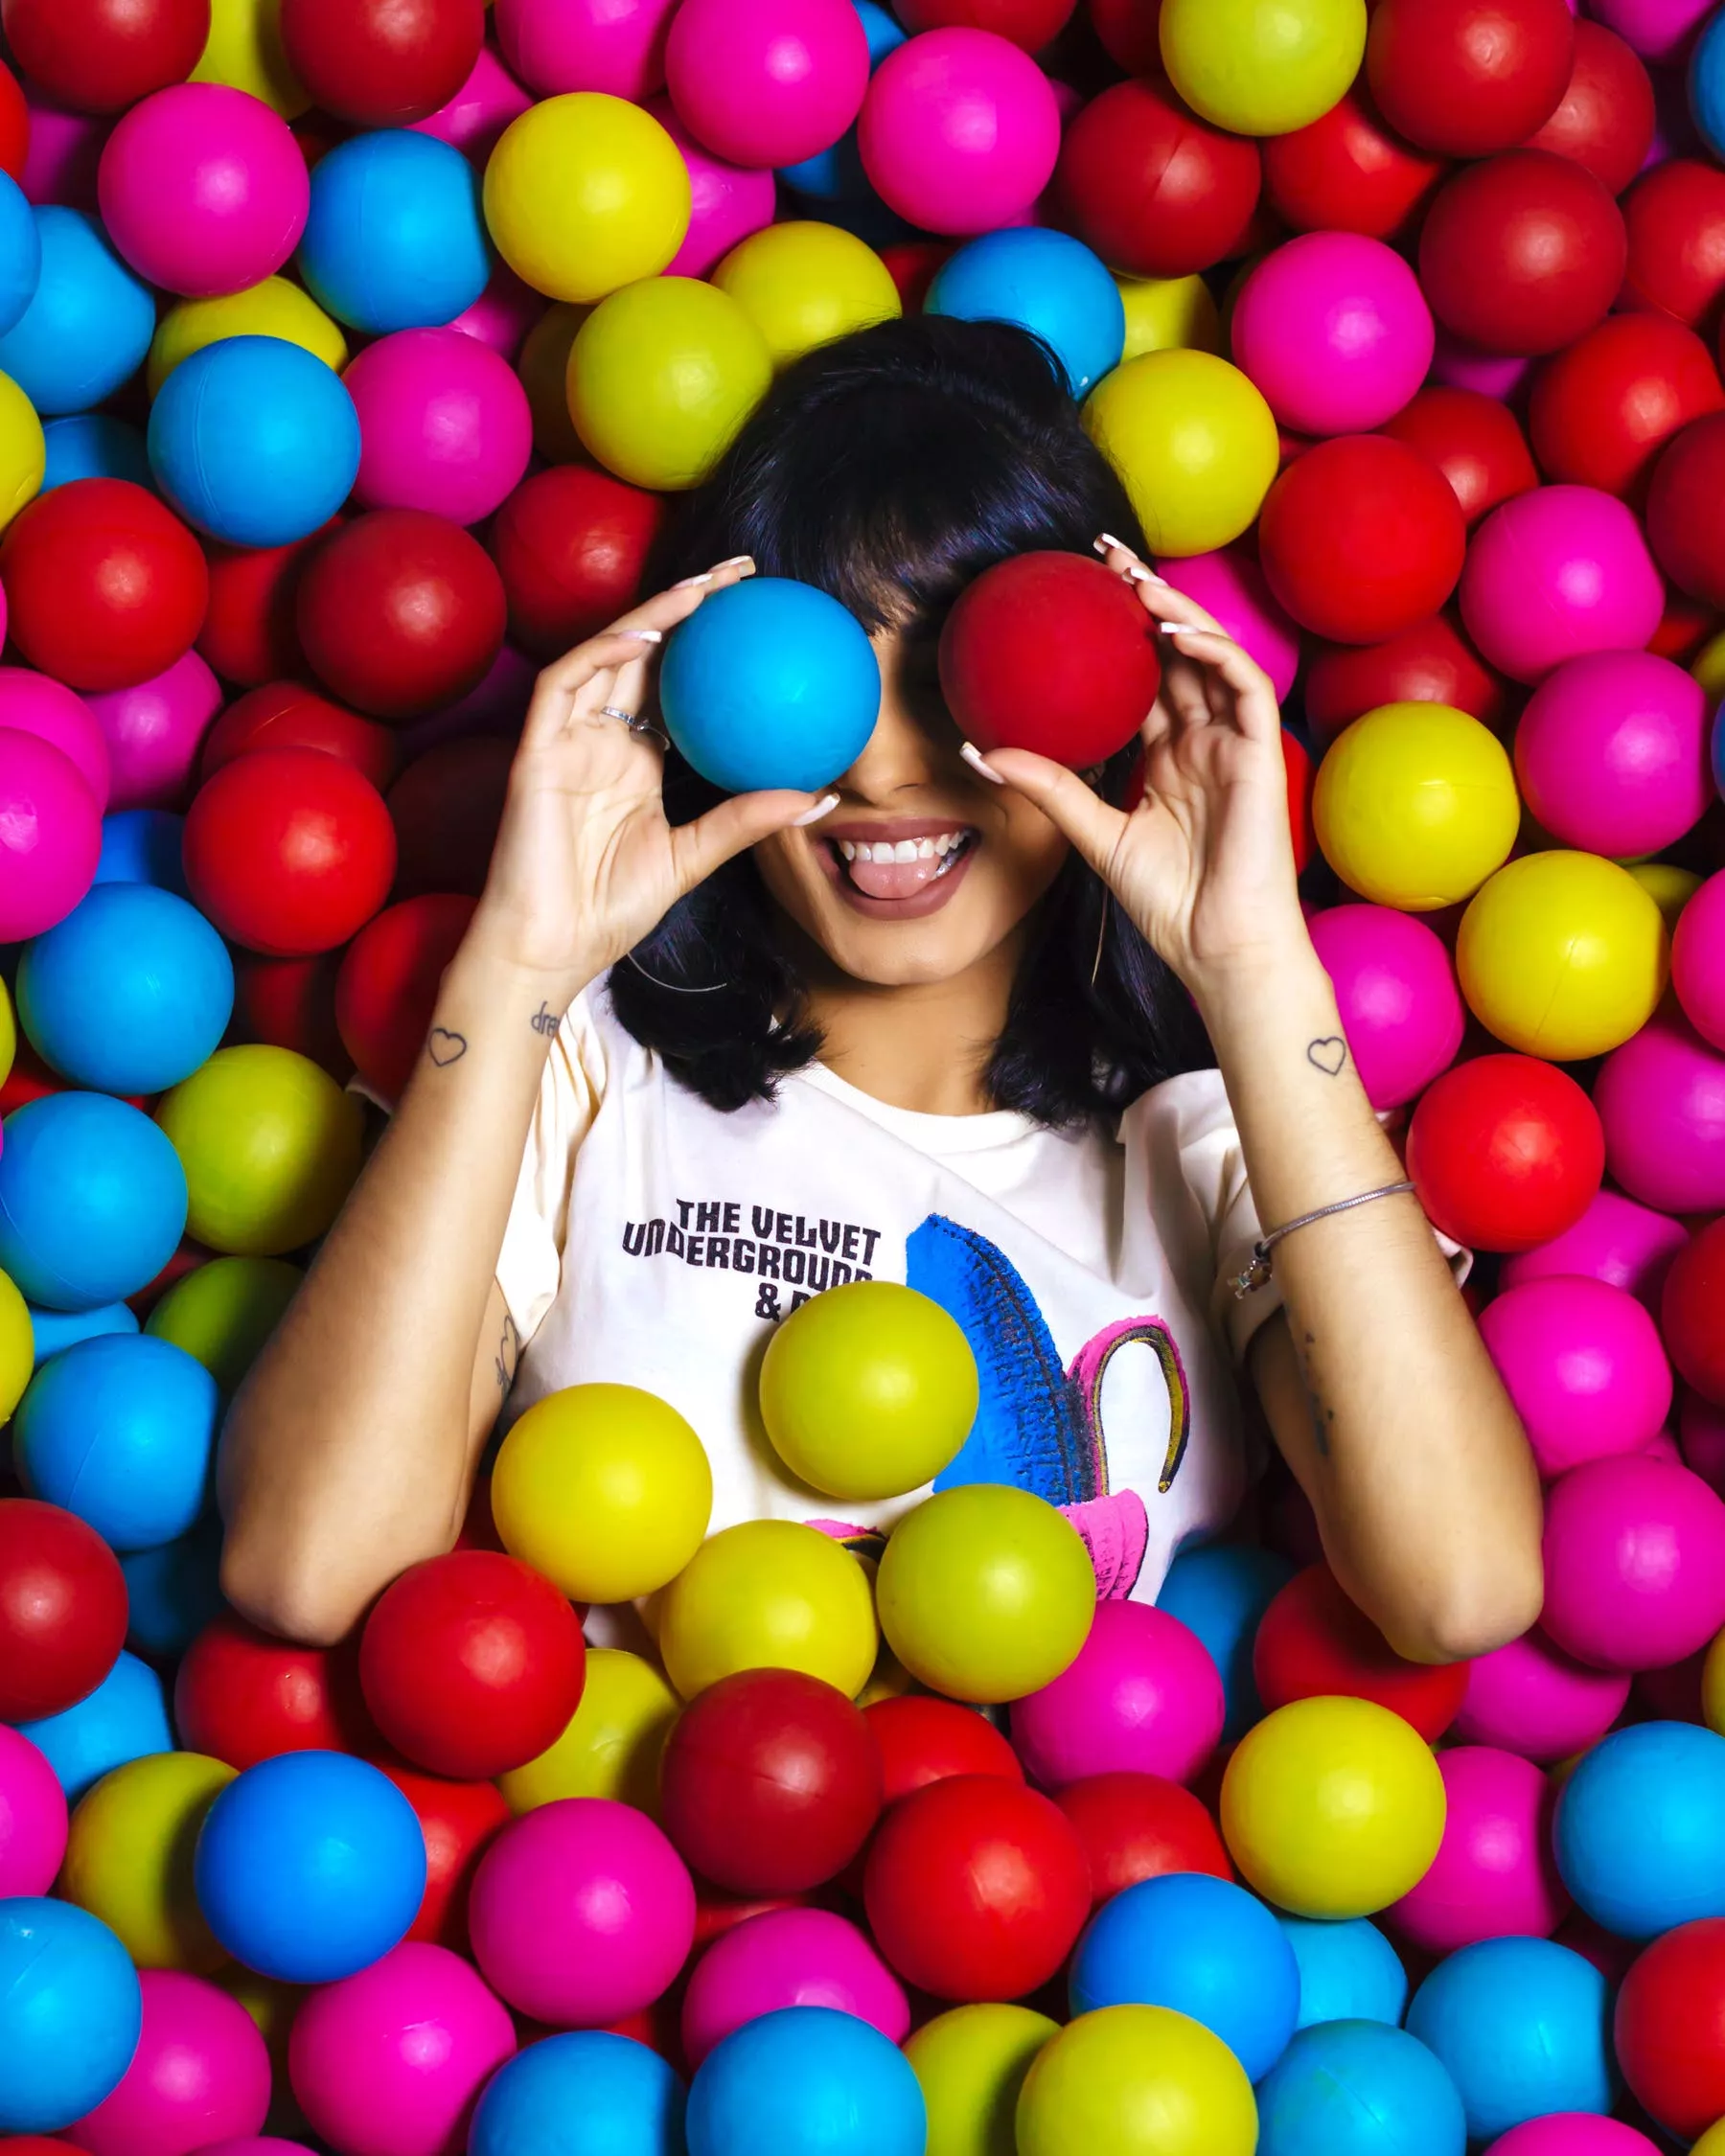 A Woman In A Ball Ball Pit